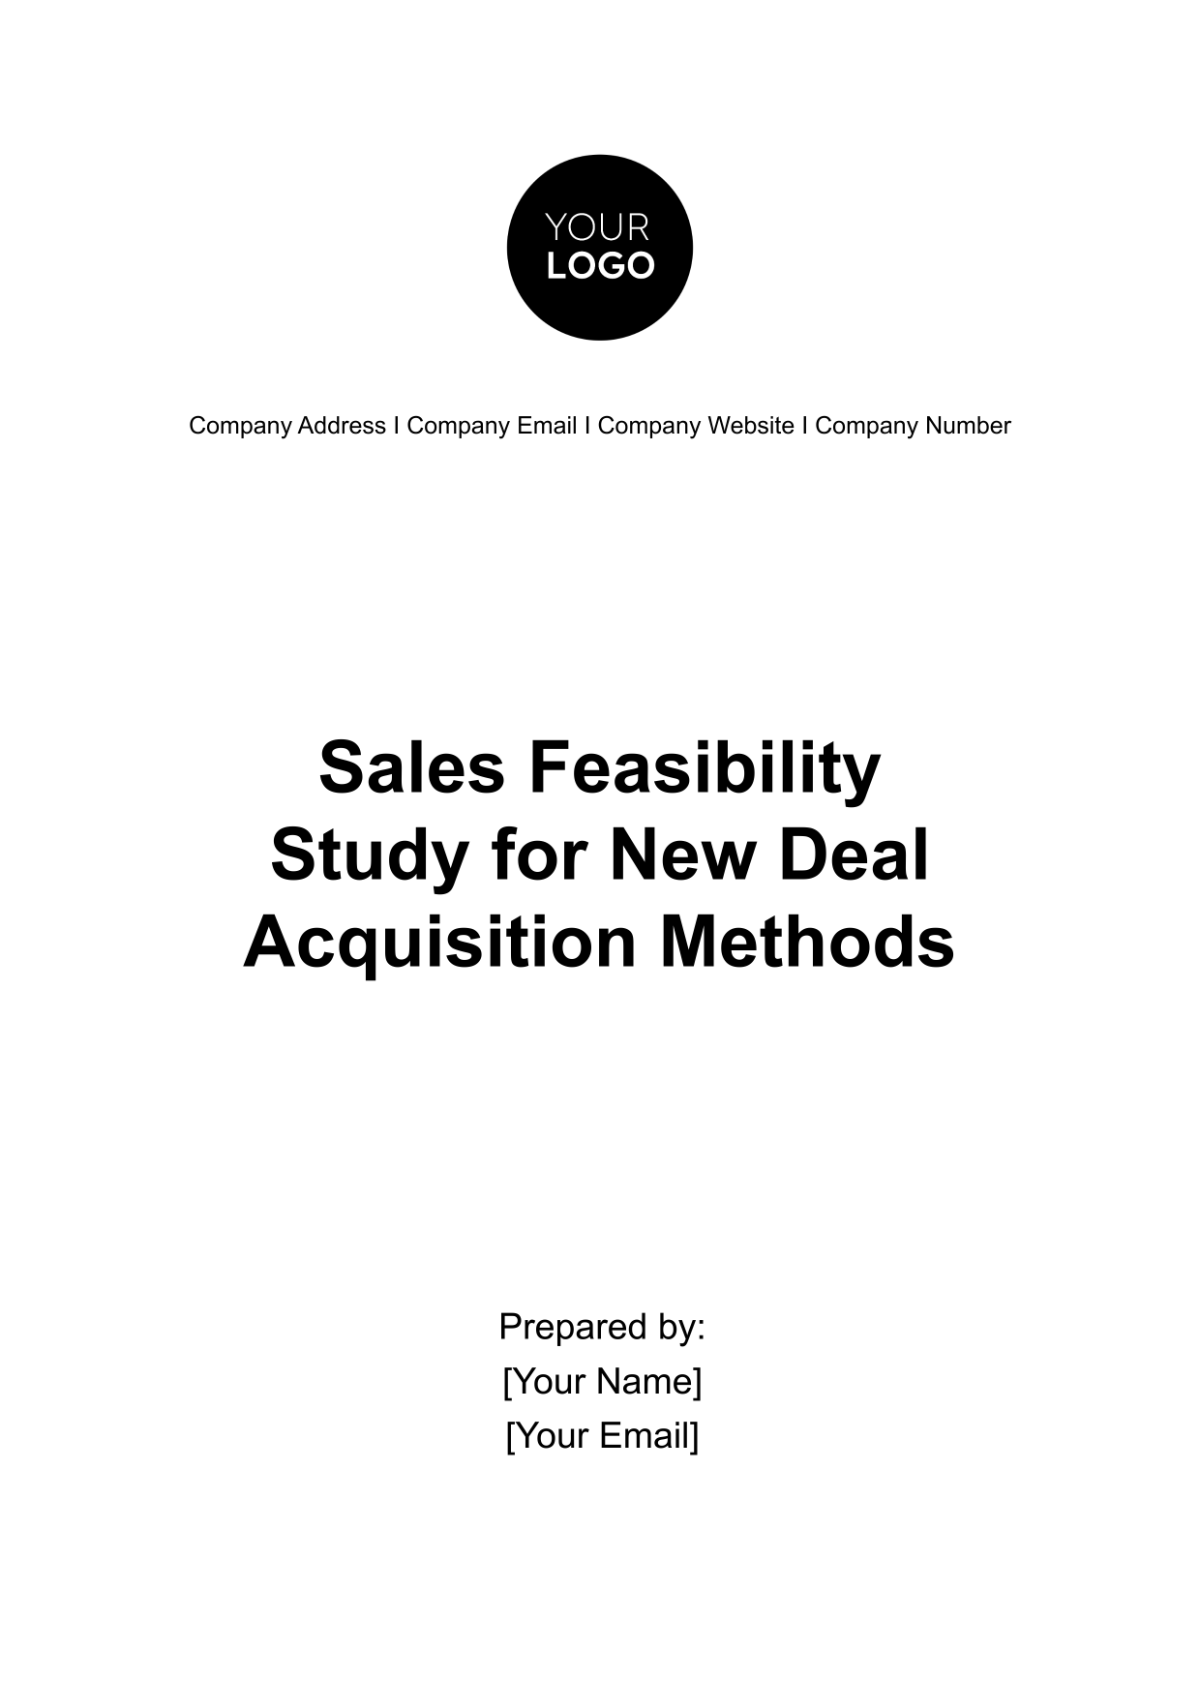 Free Sales Feasibility Study for New Deal Acquisition Methods Template